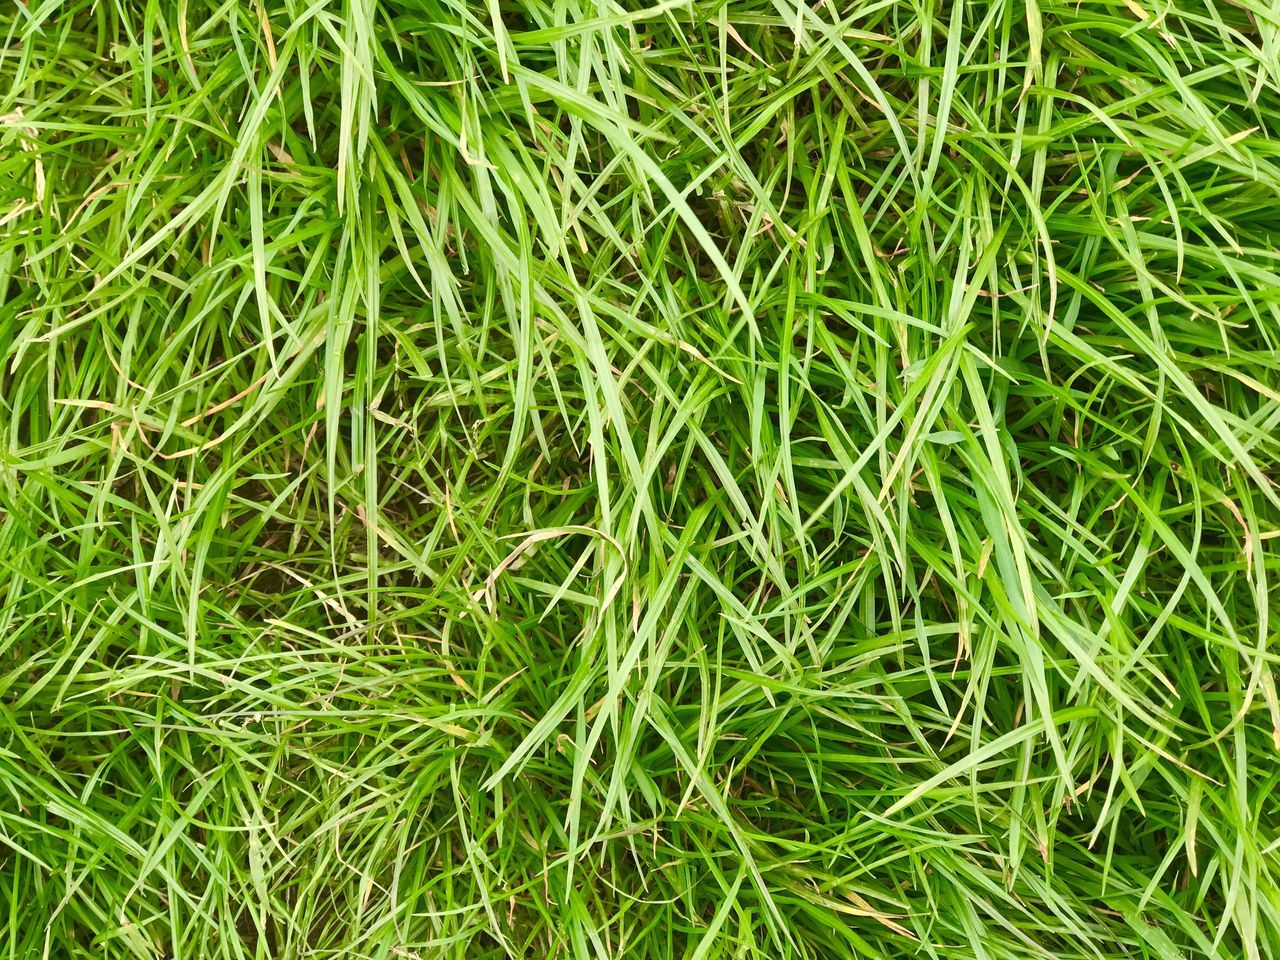 green, plant, grass, lawn, growth, full frame, backgrounds, nature, no people, beauty in nature, field, land, day, leaf, high angle view, tranquility, outdoors, flower, close-up, soil, herb, lush foliage, foliage, freshness